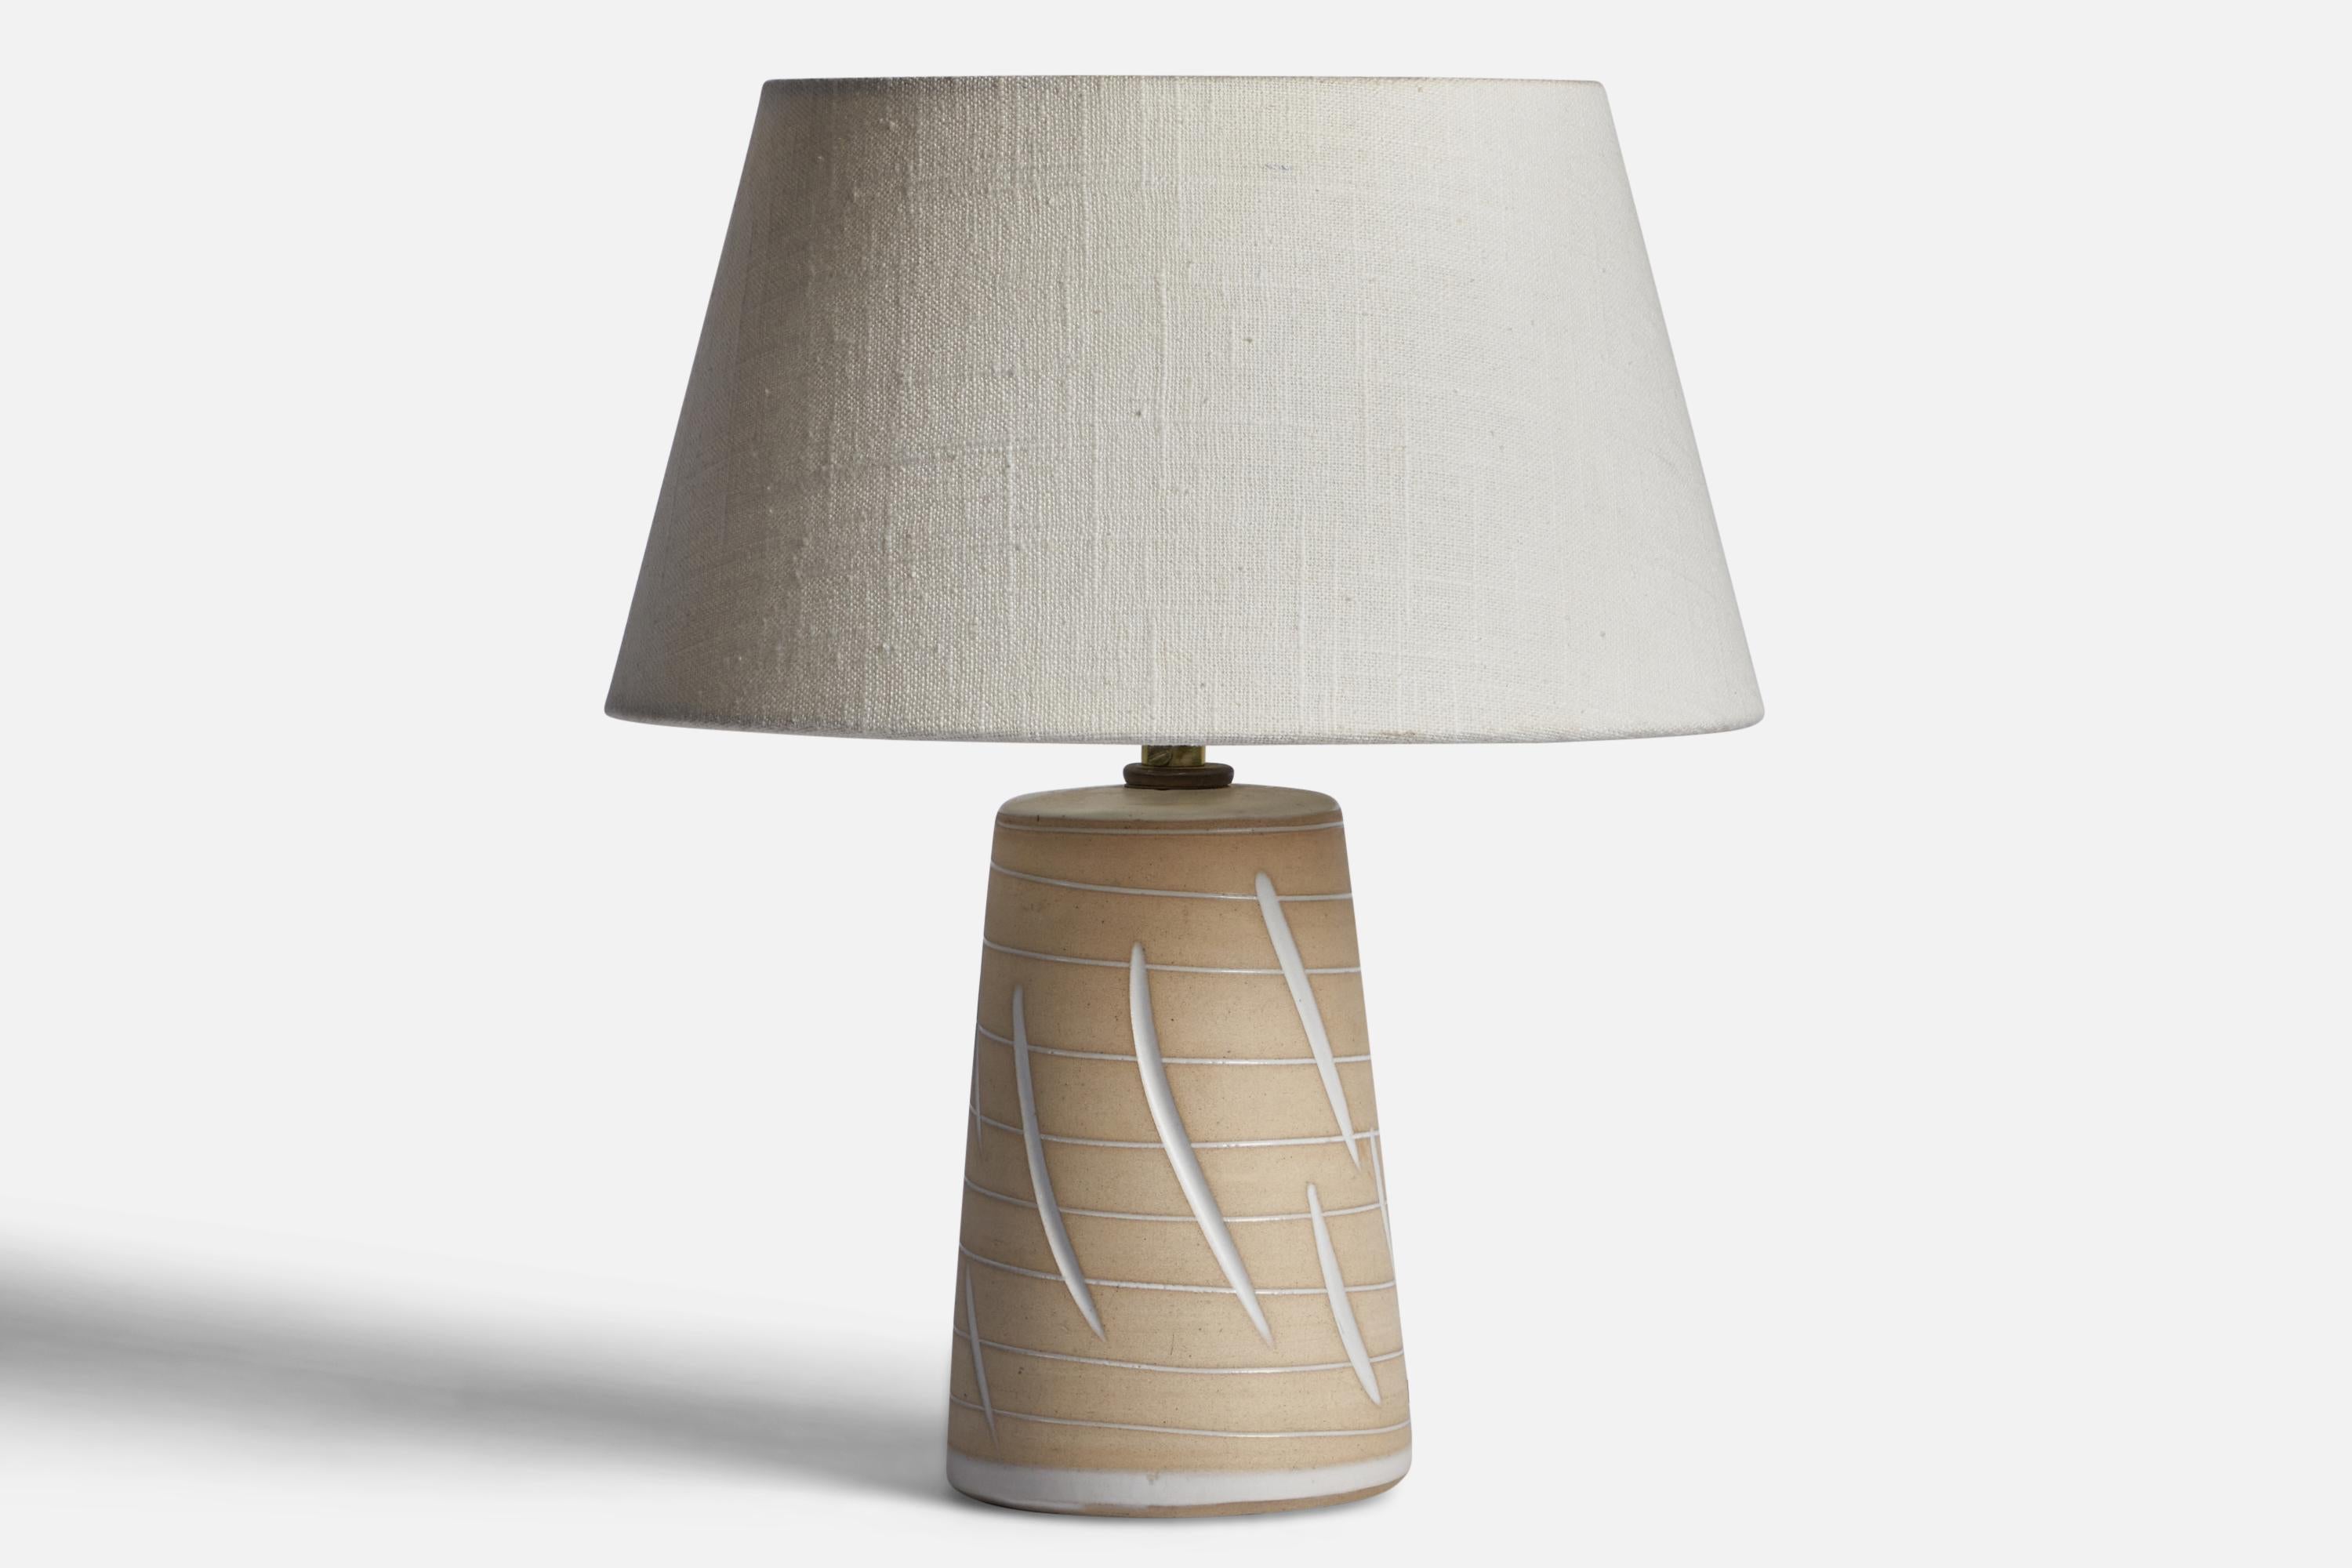 An grey-glazed ceramic table lamp designed by Jane & Gordon Martz and produced by Marshall Studios, USA, 1960s.

Dimensions of Lamp (inches): 9” H x 4.15” Diameter
Dimensions of Shade (inches): 7” Top Diameter x 10” Bottom Diameter x